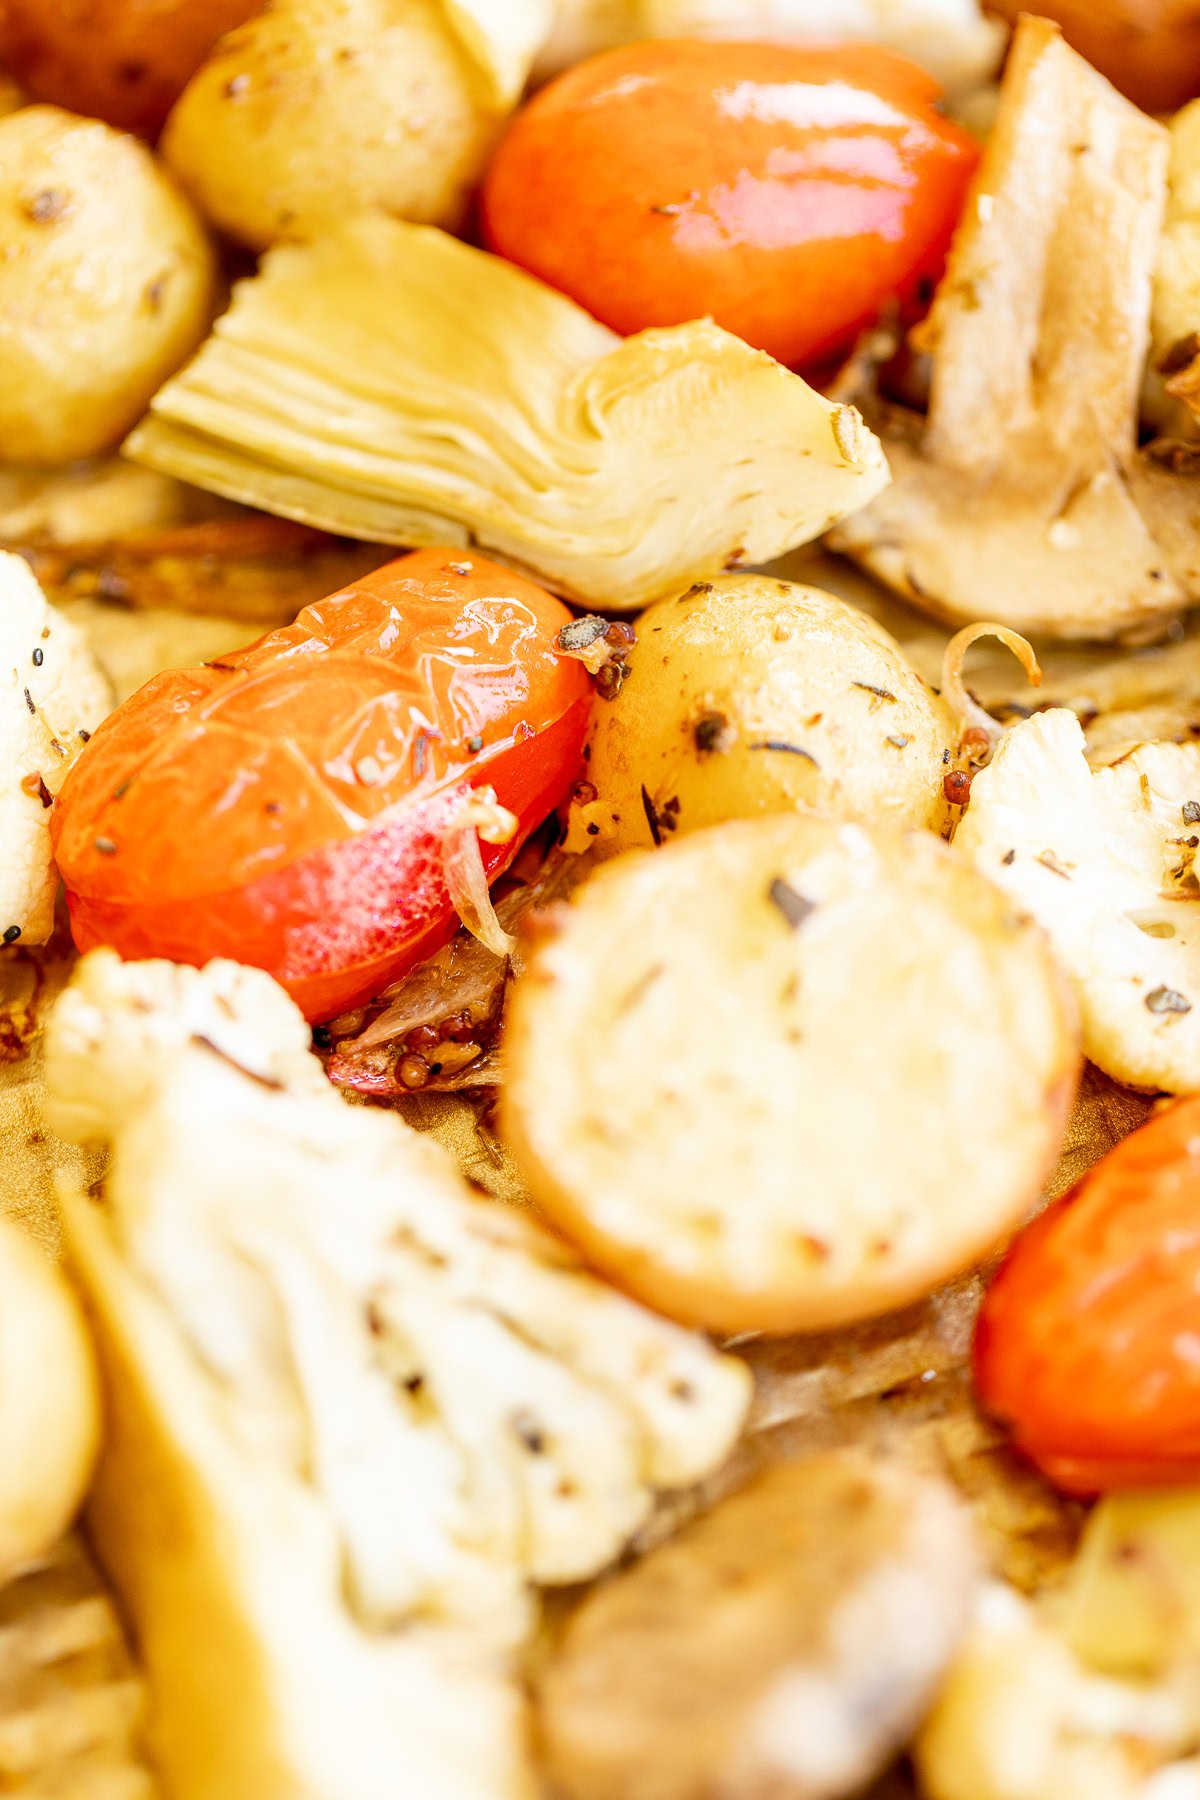 Close-up image of Italian roasted vegetables including potatoes, tomatoes, and artichokes on a baking sheet.